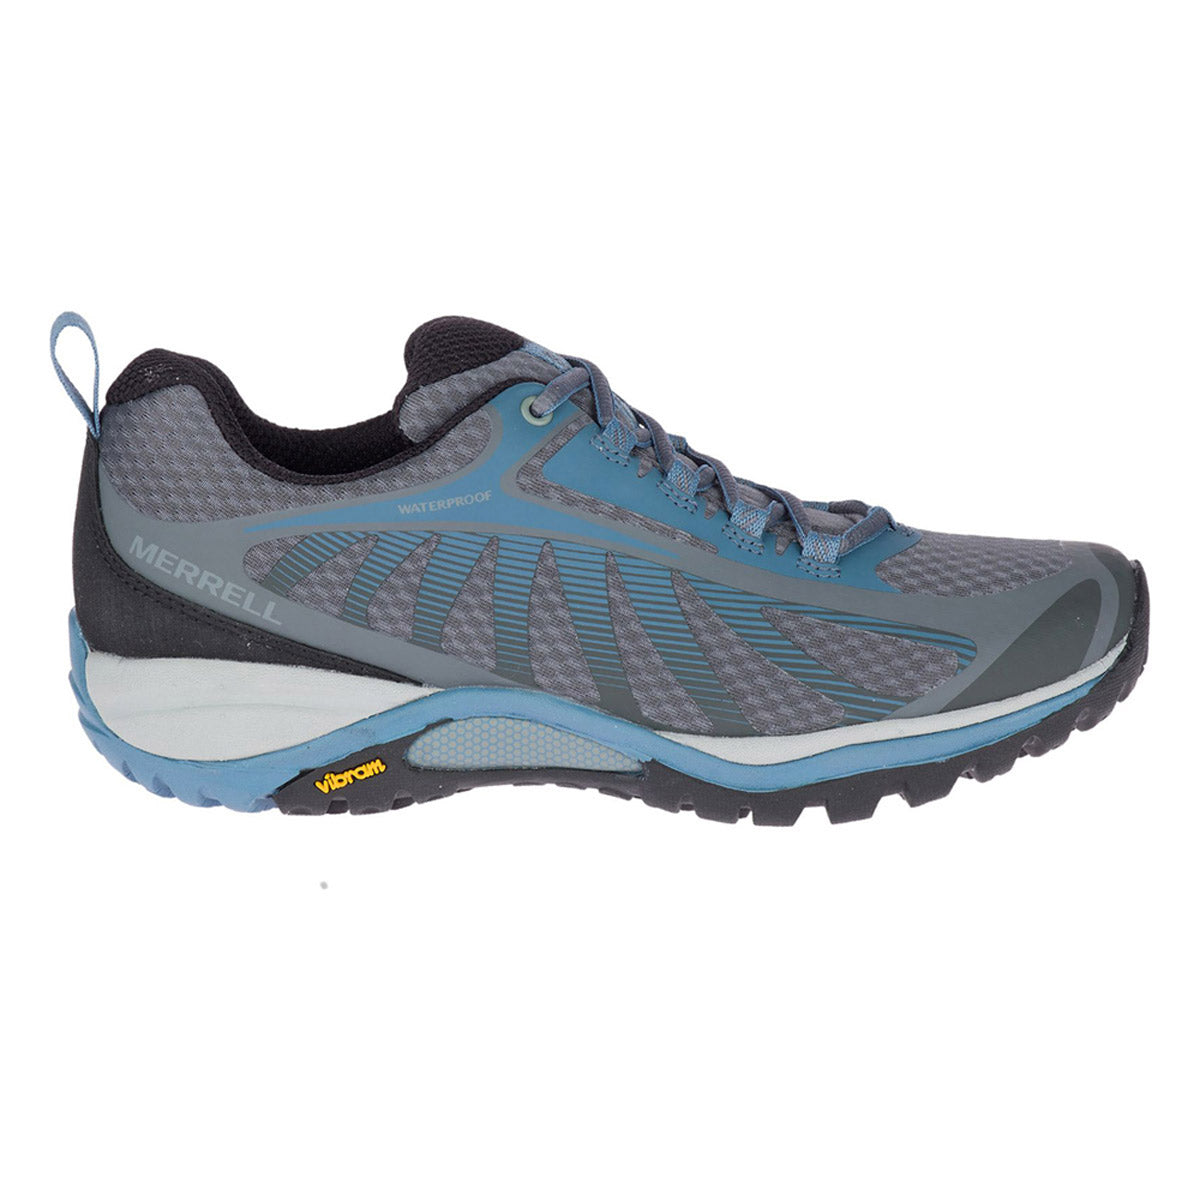 A Merrell Siren Edge 3 waterproof hiking shoe featuring gray mesh with blue accents, a durable Vibram® Megagrip sole, and a brand logo displayed on the side.